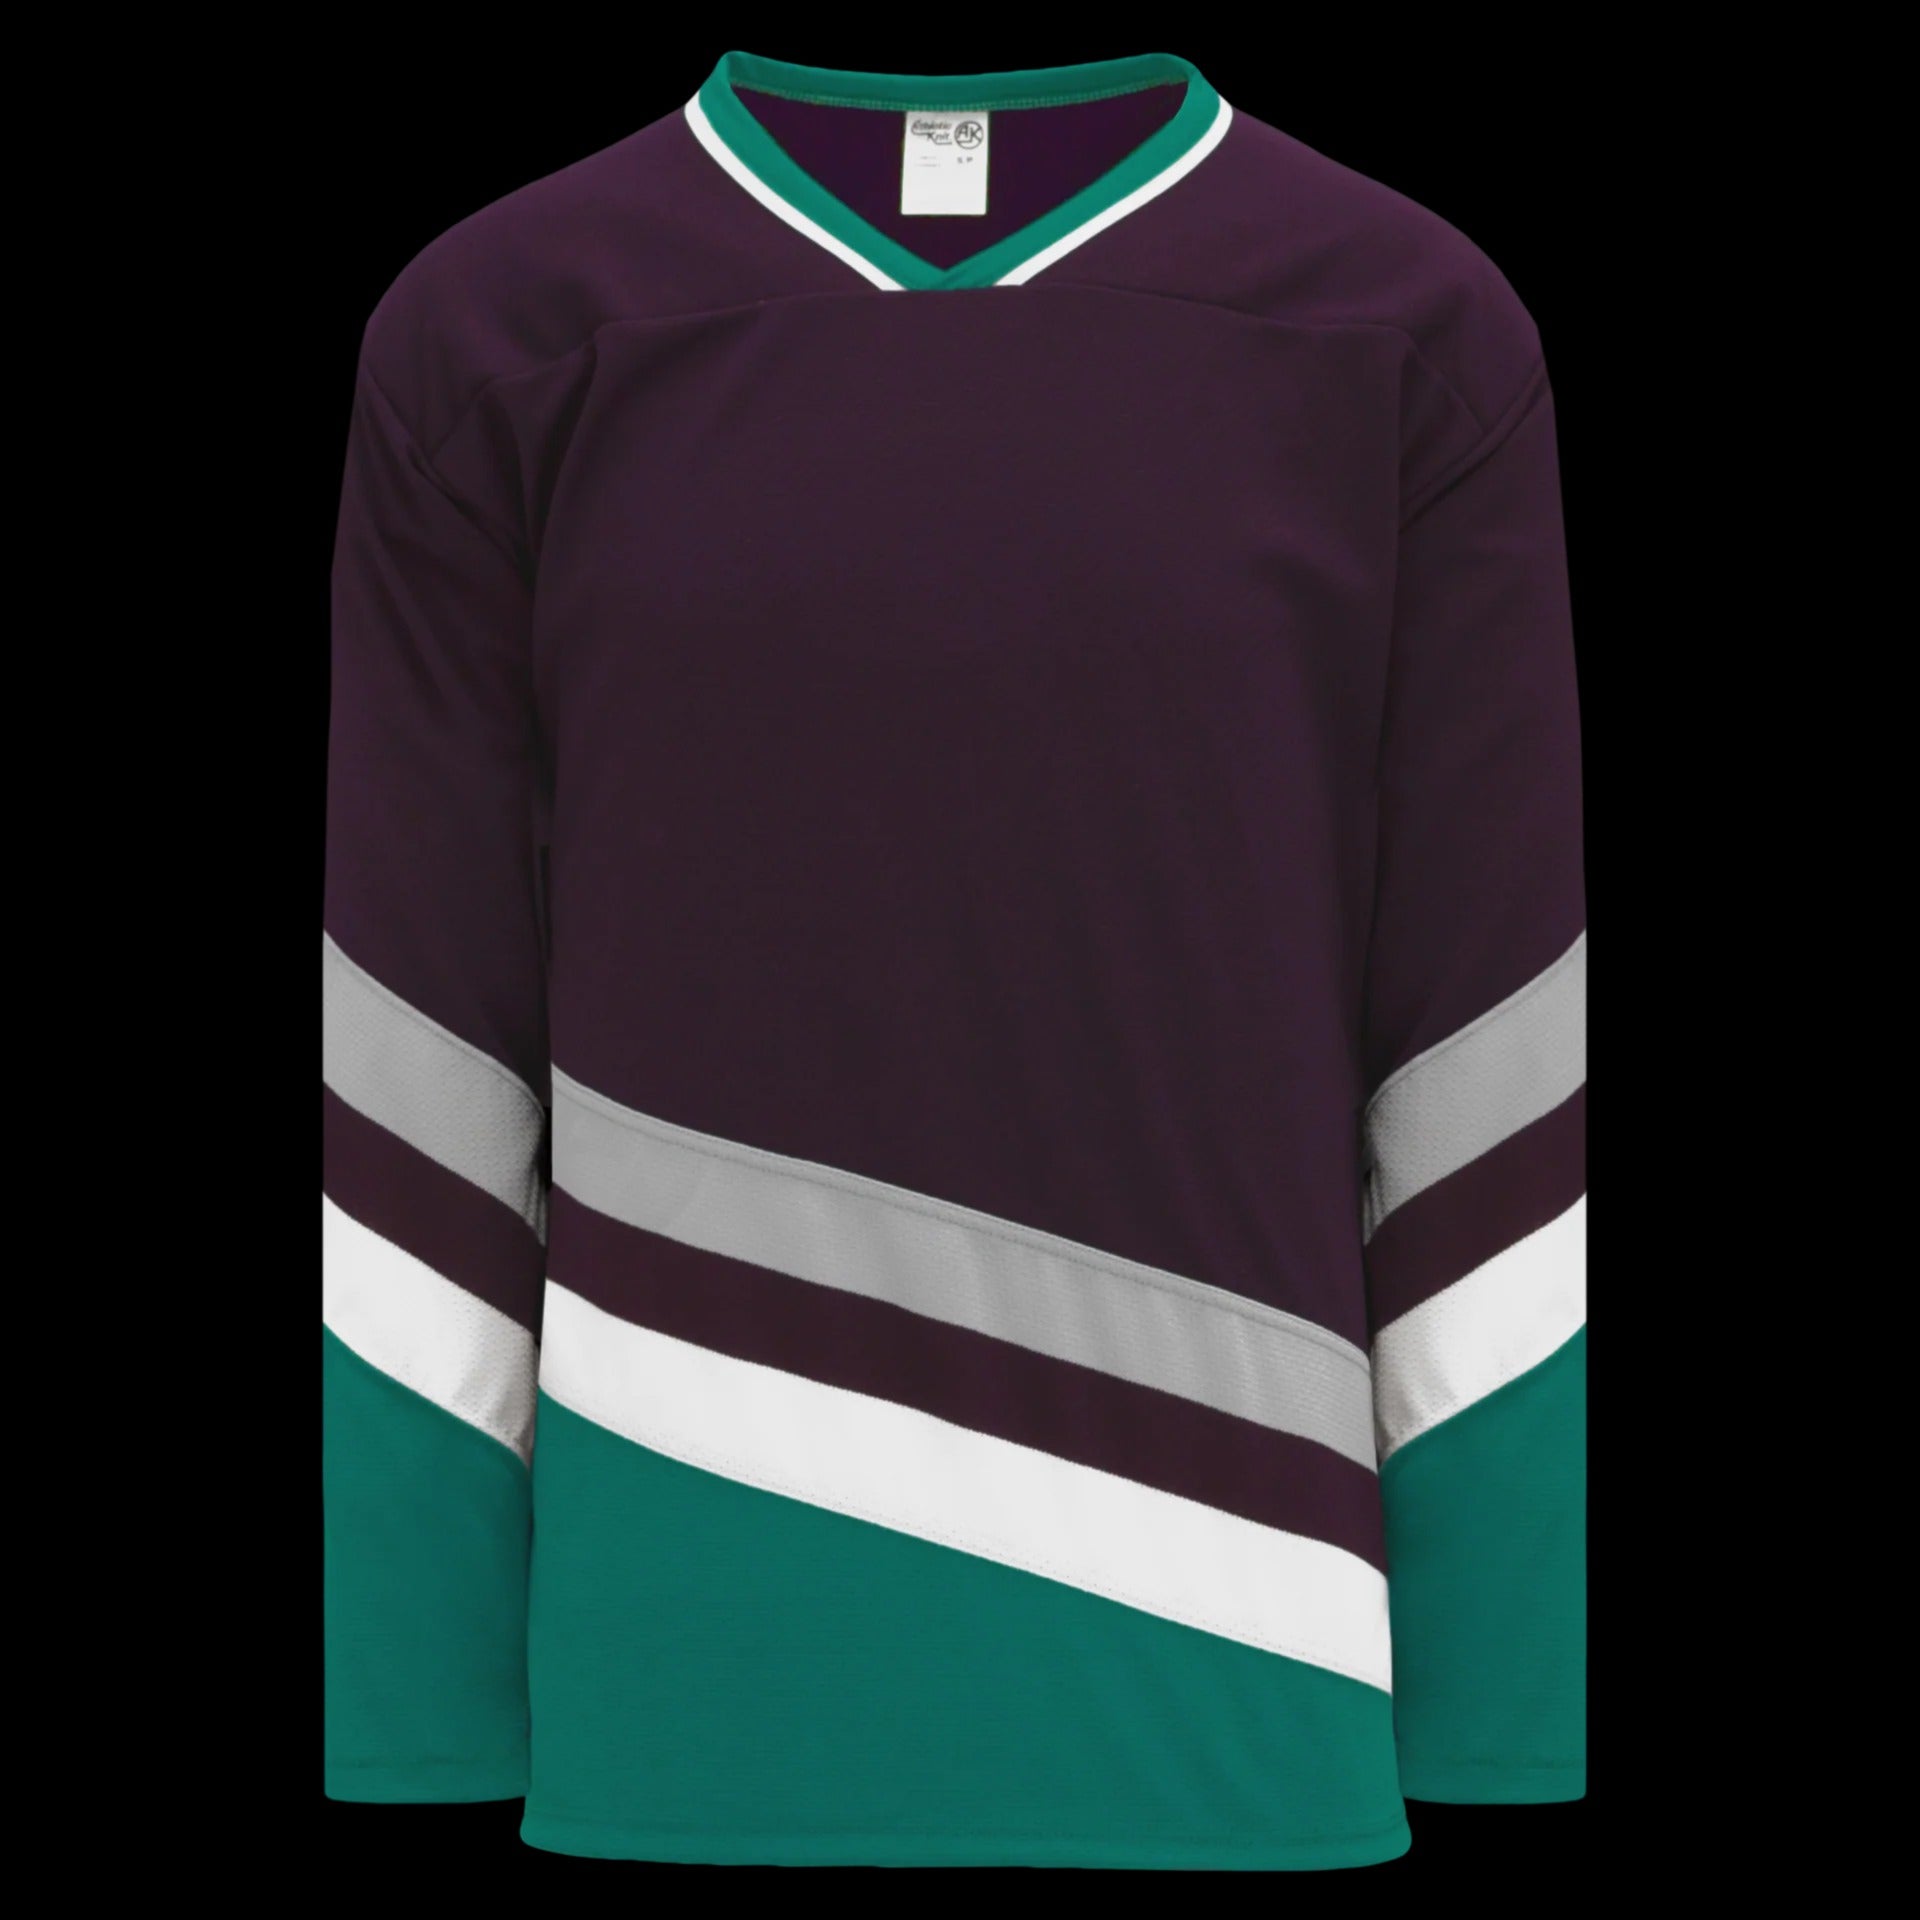 Mighty Ducks “Conway” Hockey Jersey for Sale in Concord, NC